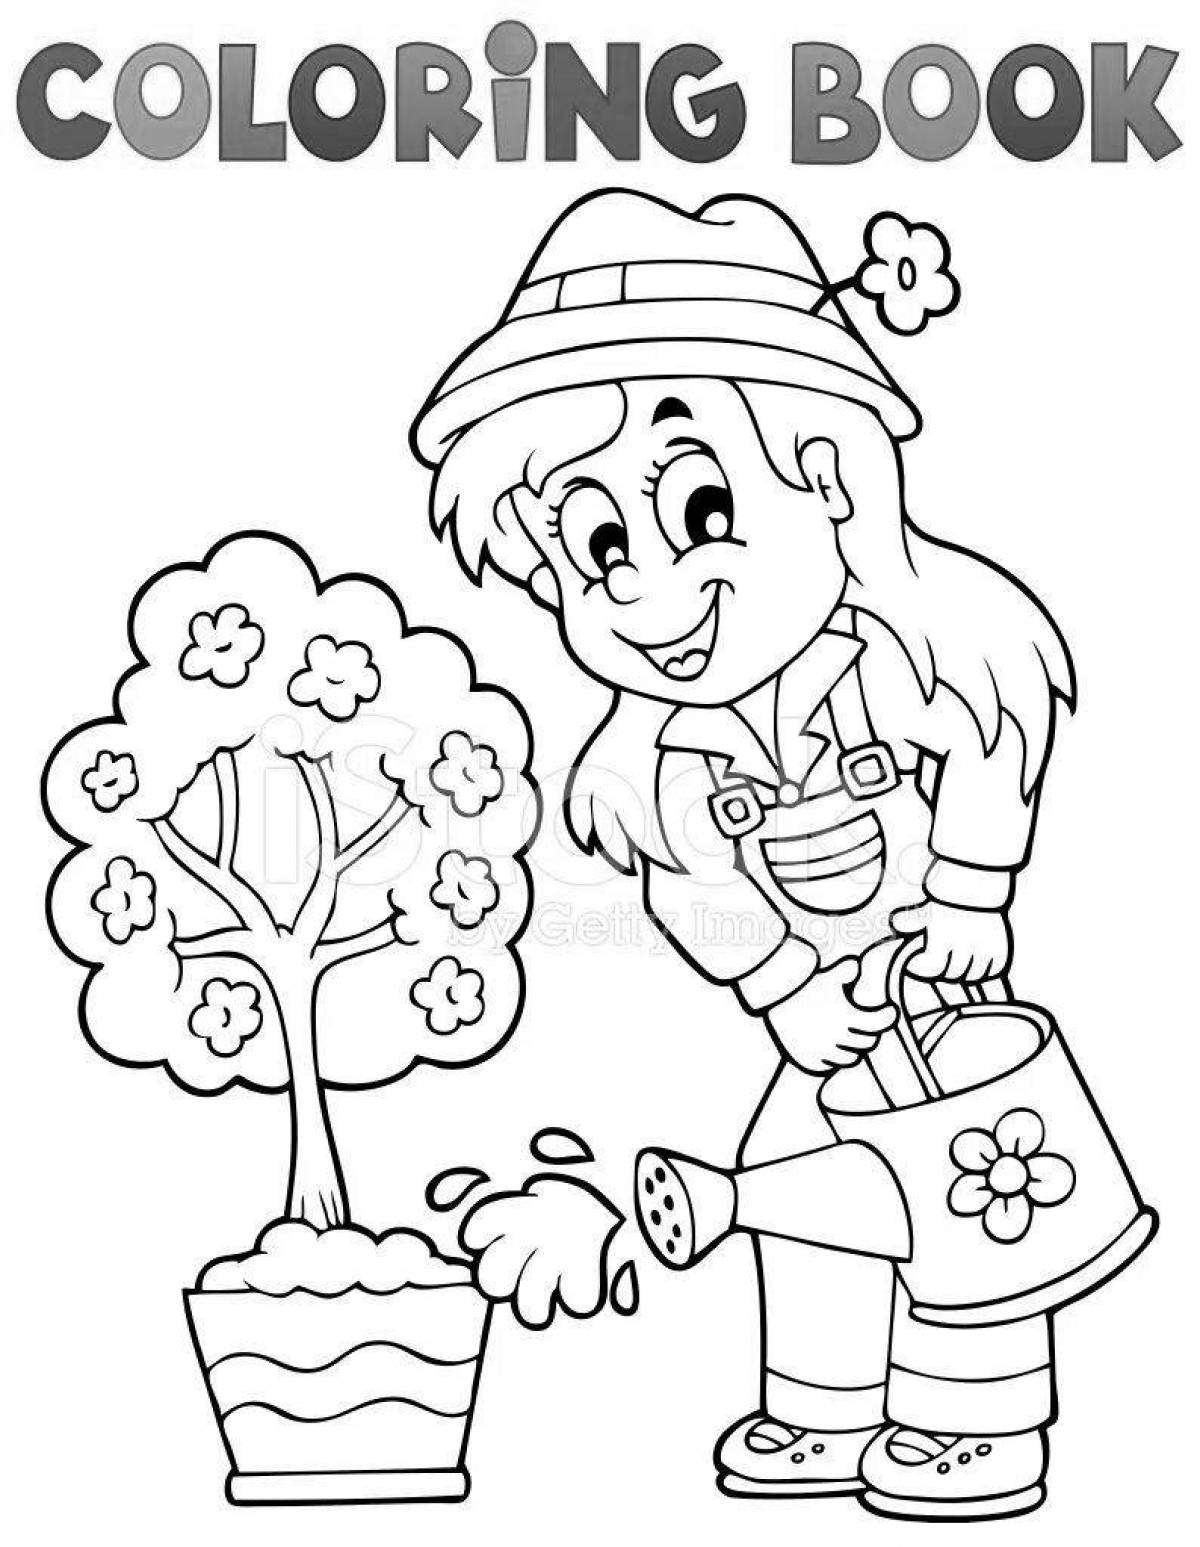 Colorful gardener coloring book for children